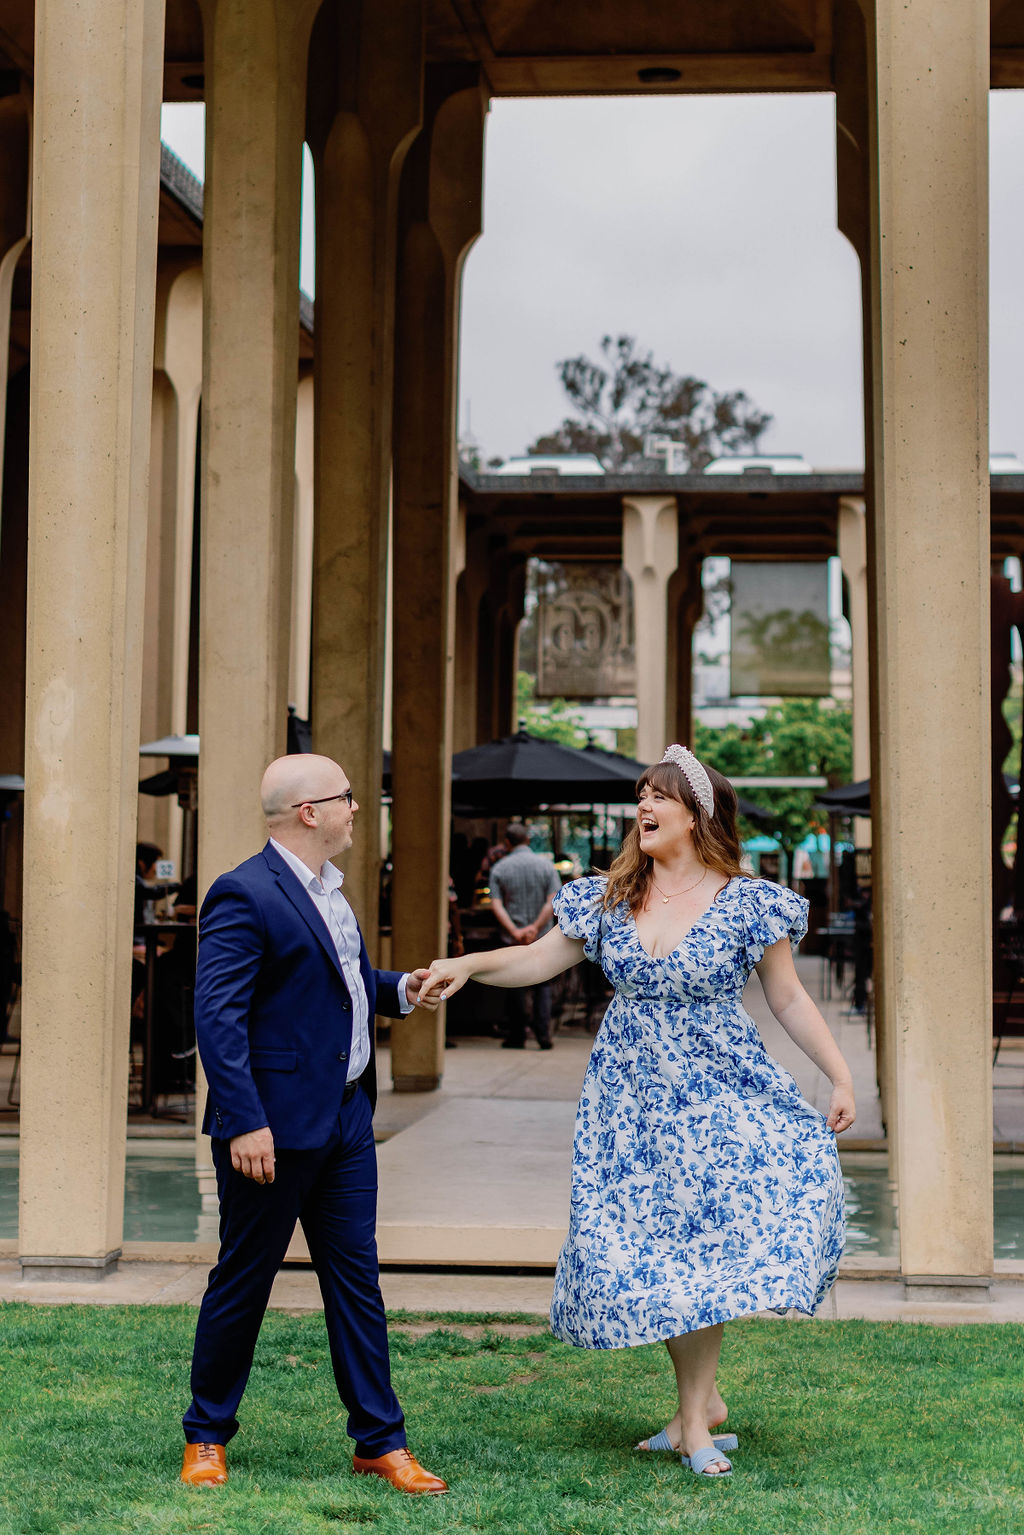 Engagement photo of Jimmy and Hannah dancing outside at the San Diego Museum of art. |Photo by California Photographer Sarah Block Photography